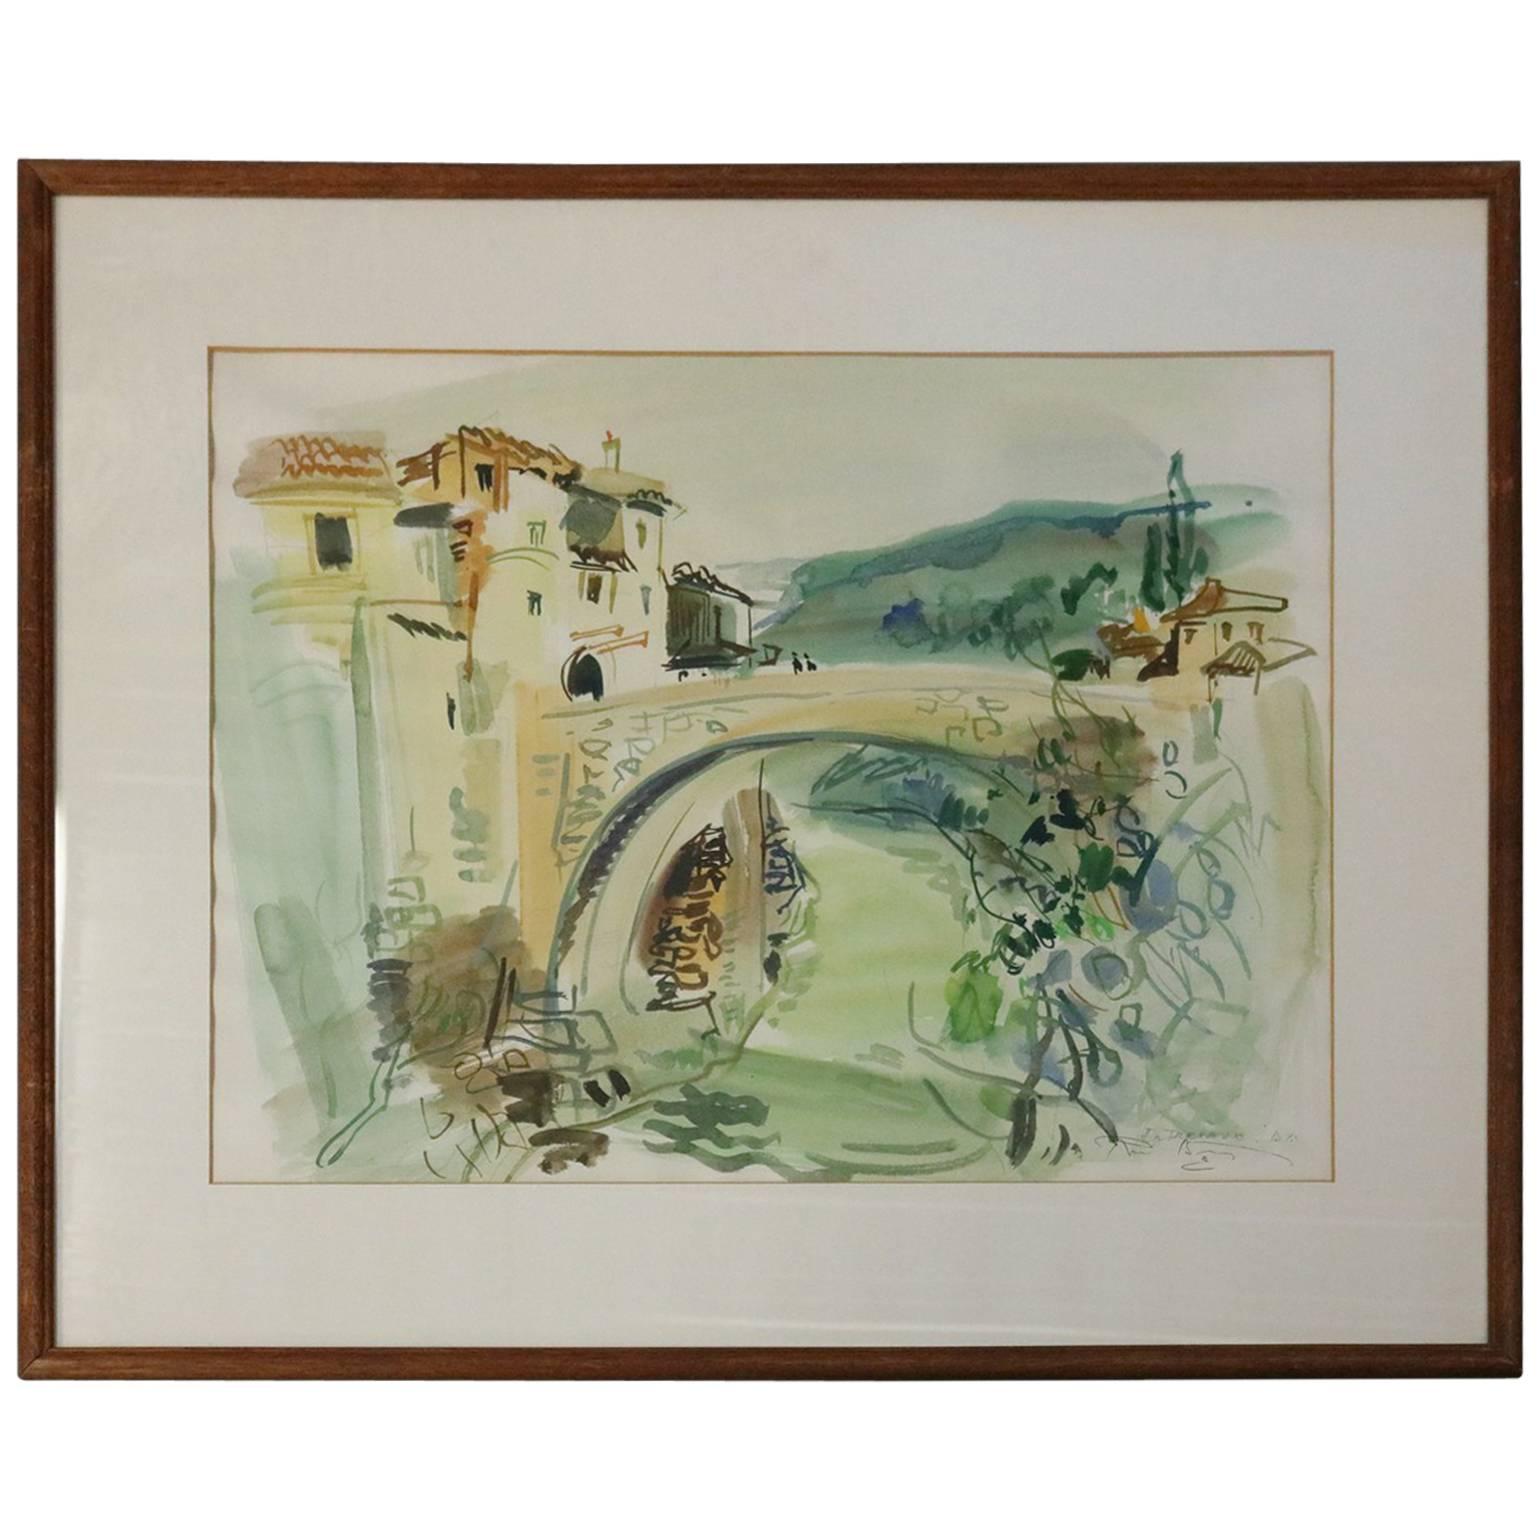 French Cityscape Watercolor Painting "Entrevaux" by Roger Bertin, 20th Century